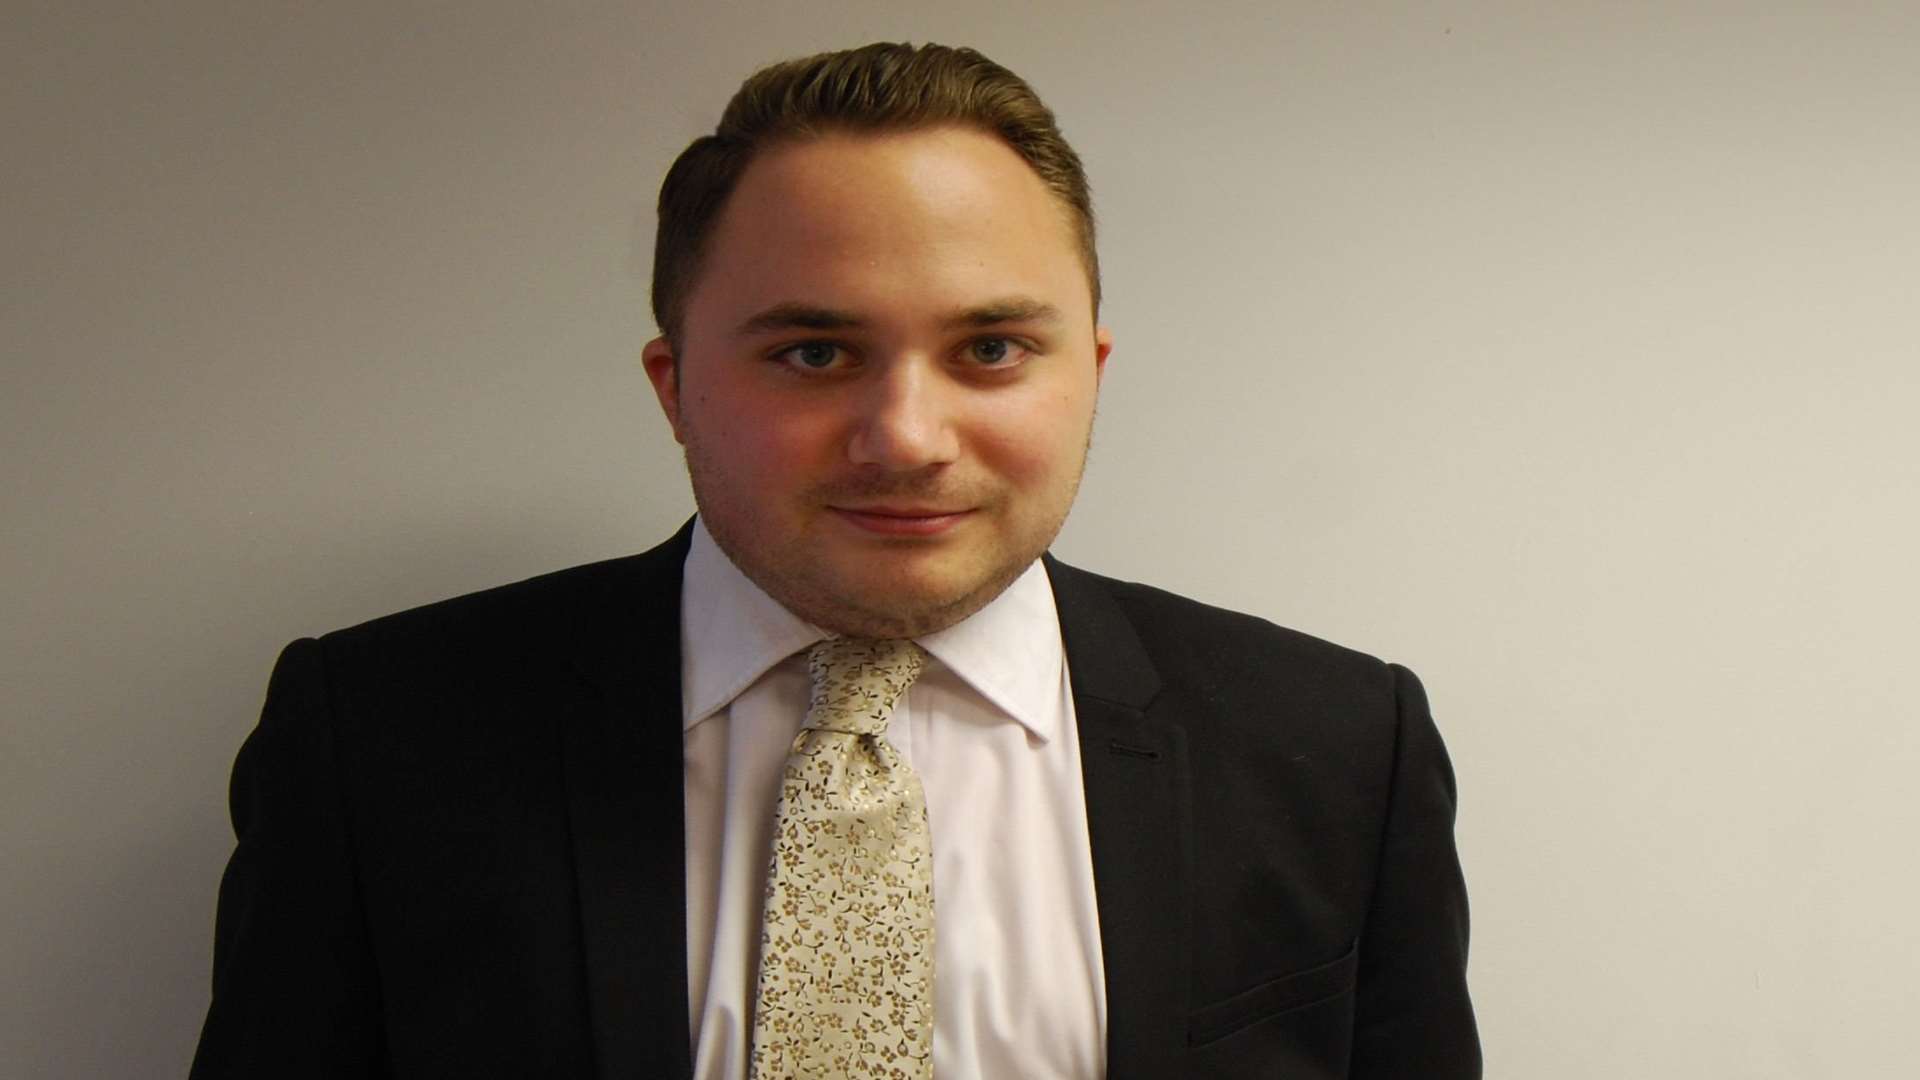 Kieron Whiting, sales manager of Kent Estate Agencies in Herne Bay